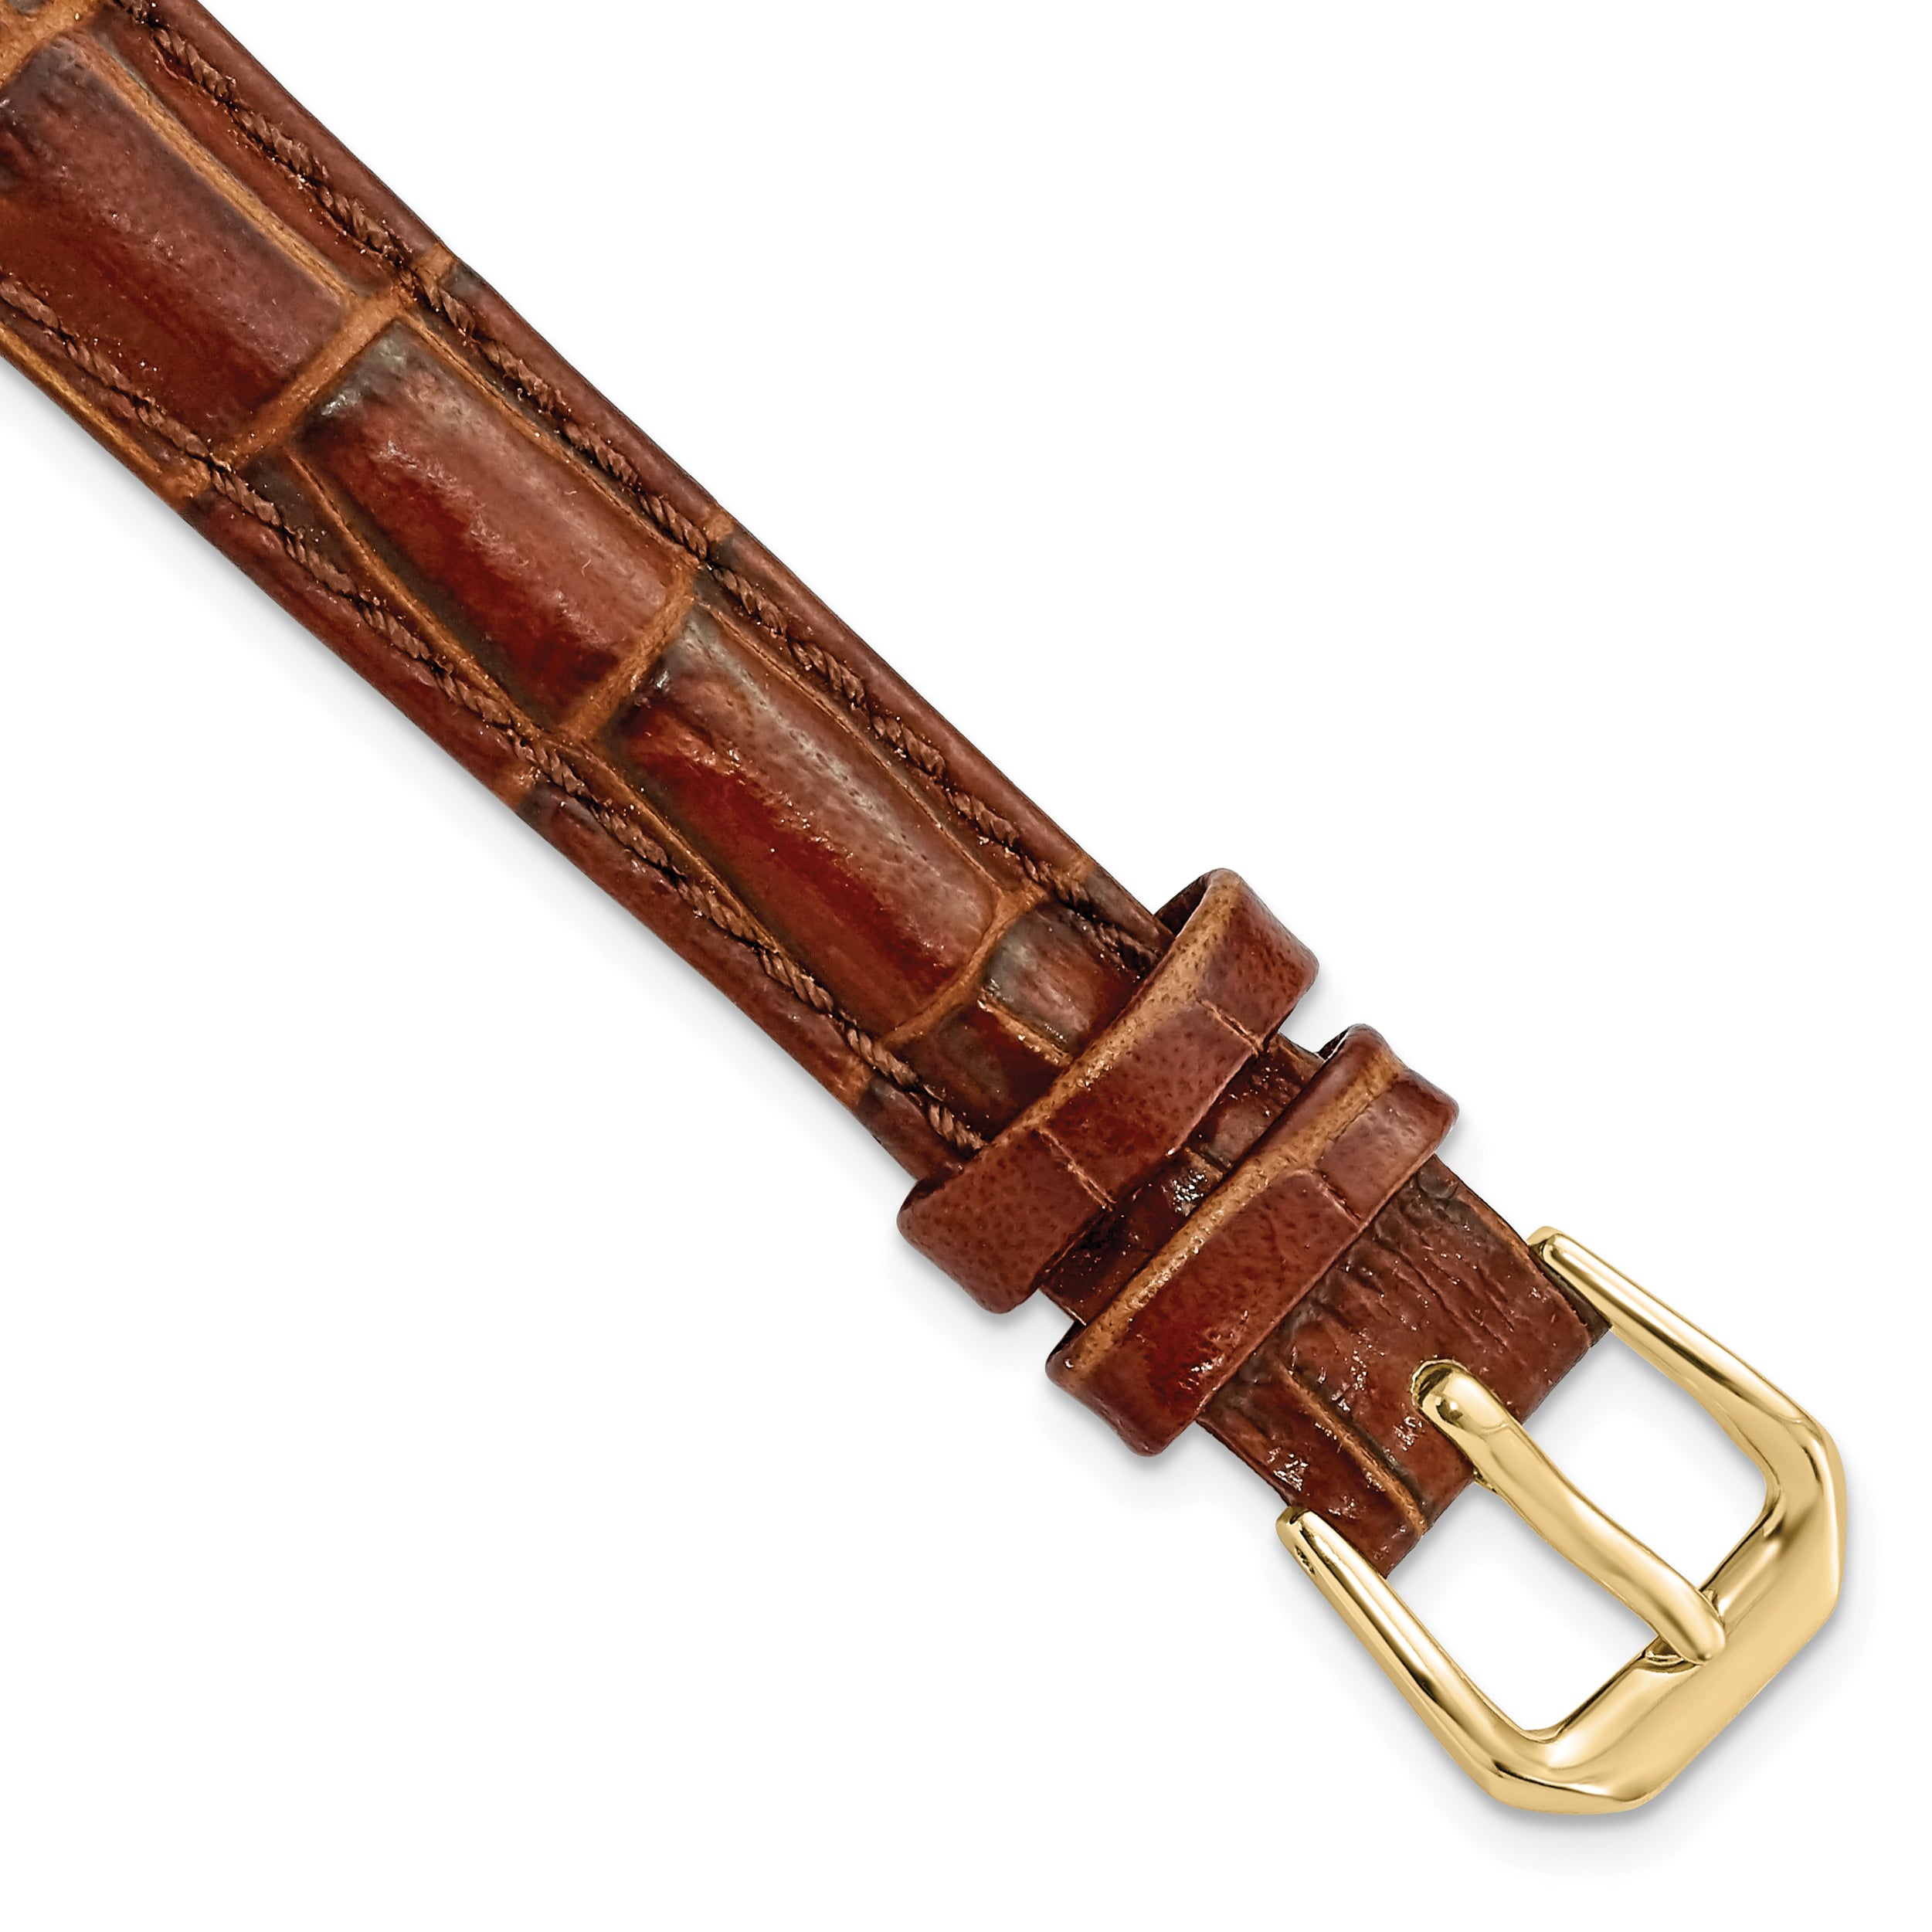 DeBeer 12mm Havana Crocodile Grain Leather with Dark Stitching and Gold-tone Buckle 6.75 inch Watch Band